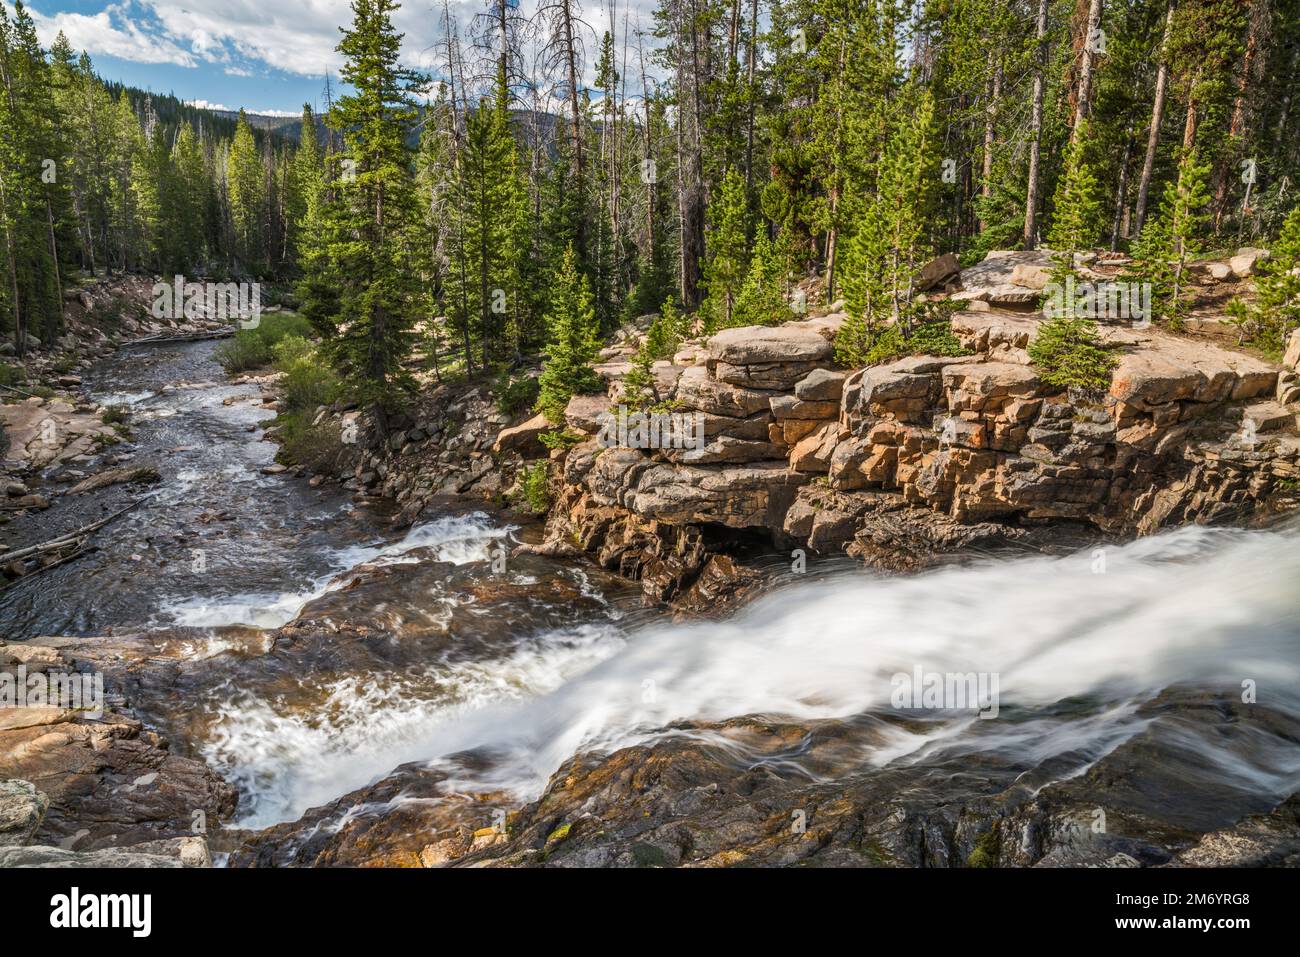 Provo River Falls, Mirror Lake Scenic Byway, Uinta Mountains, Uinta Wasatch cache National Forest, Utah, USA Foto Stock